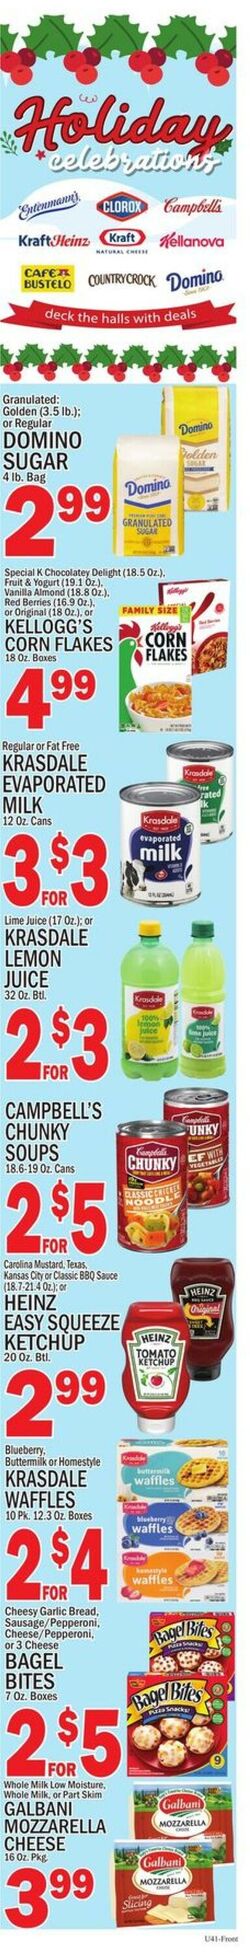 Weekly ad CTown 03/17/2023 - 03/23/2023